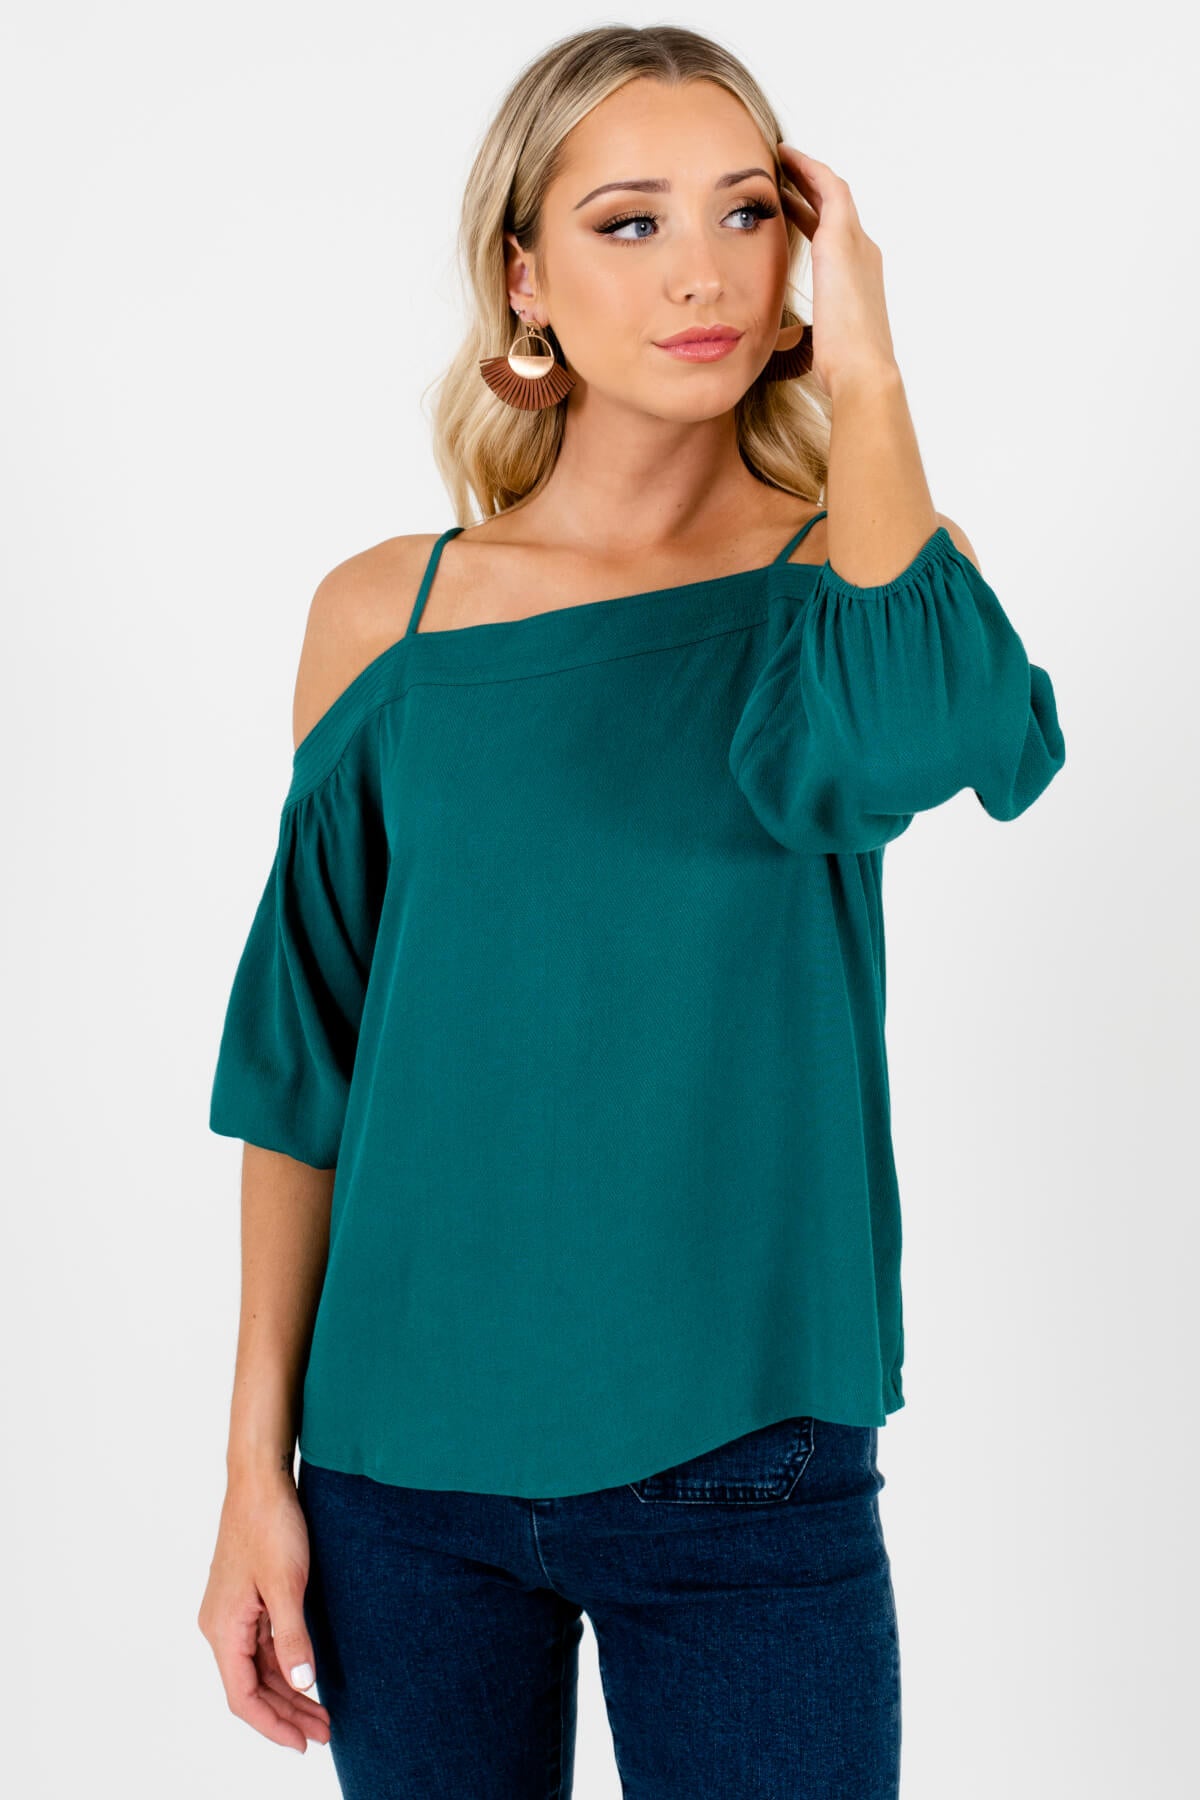 Teal Green Pleated Accents Boutique Tops for Women